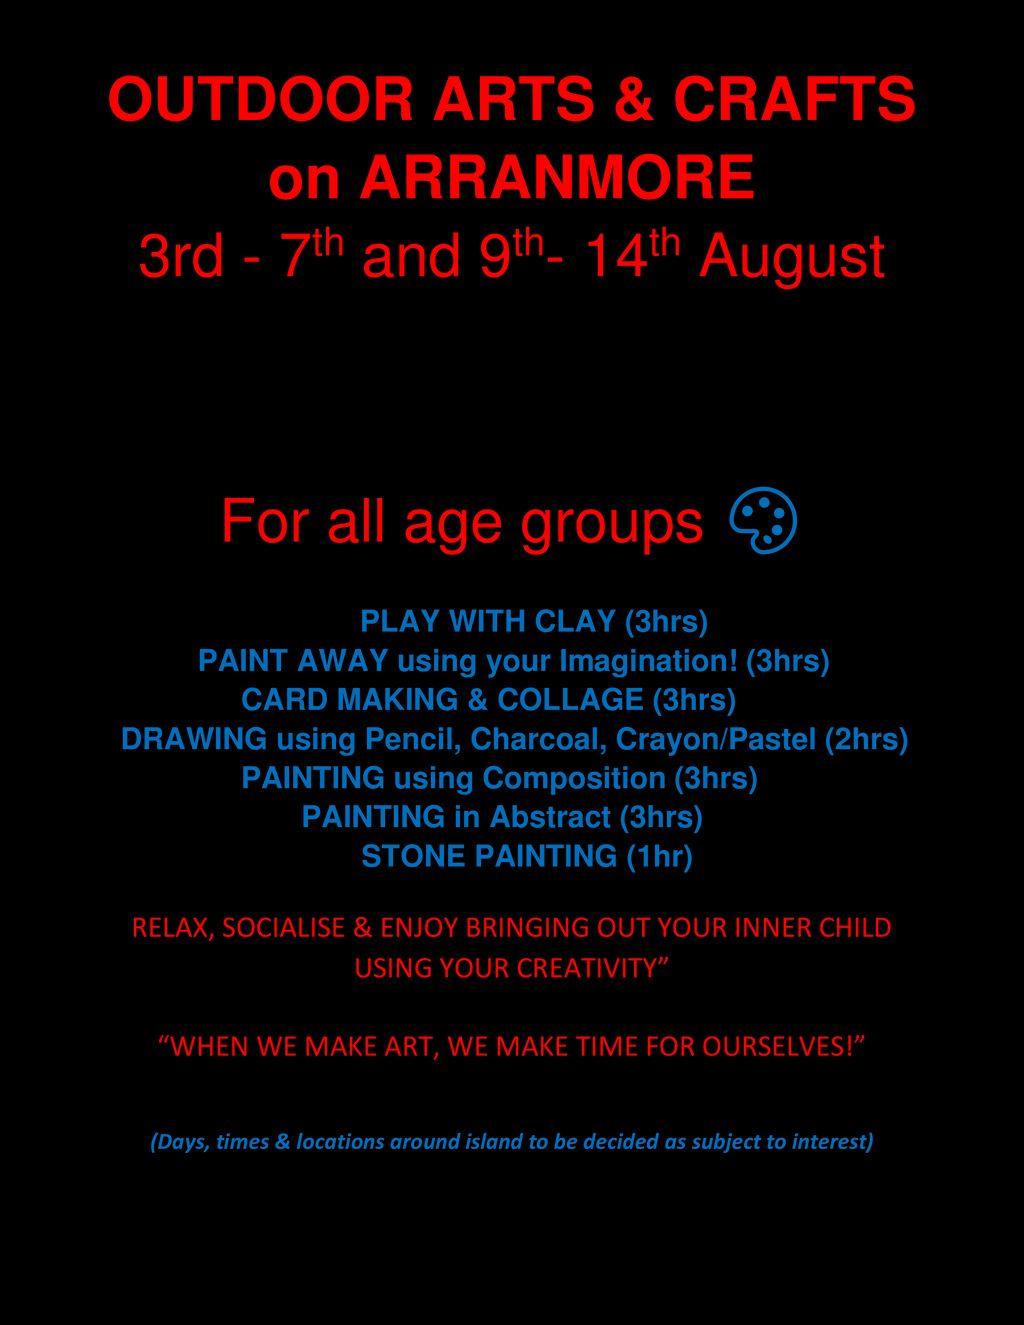 Arranmore Arts and Crafts